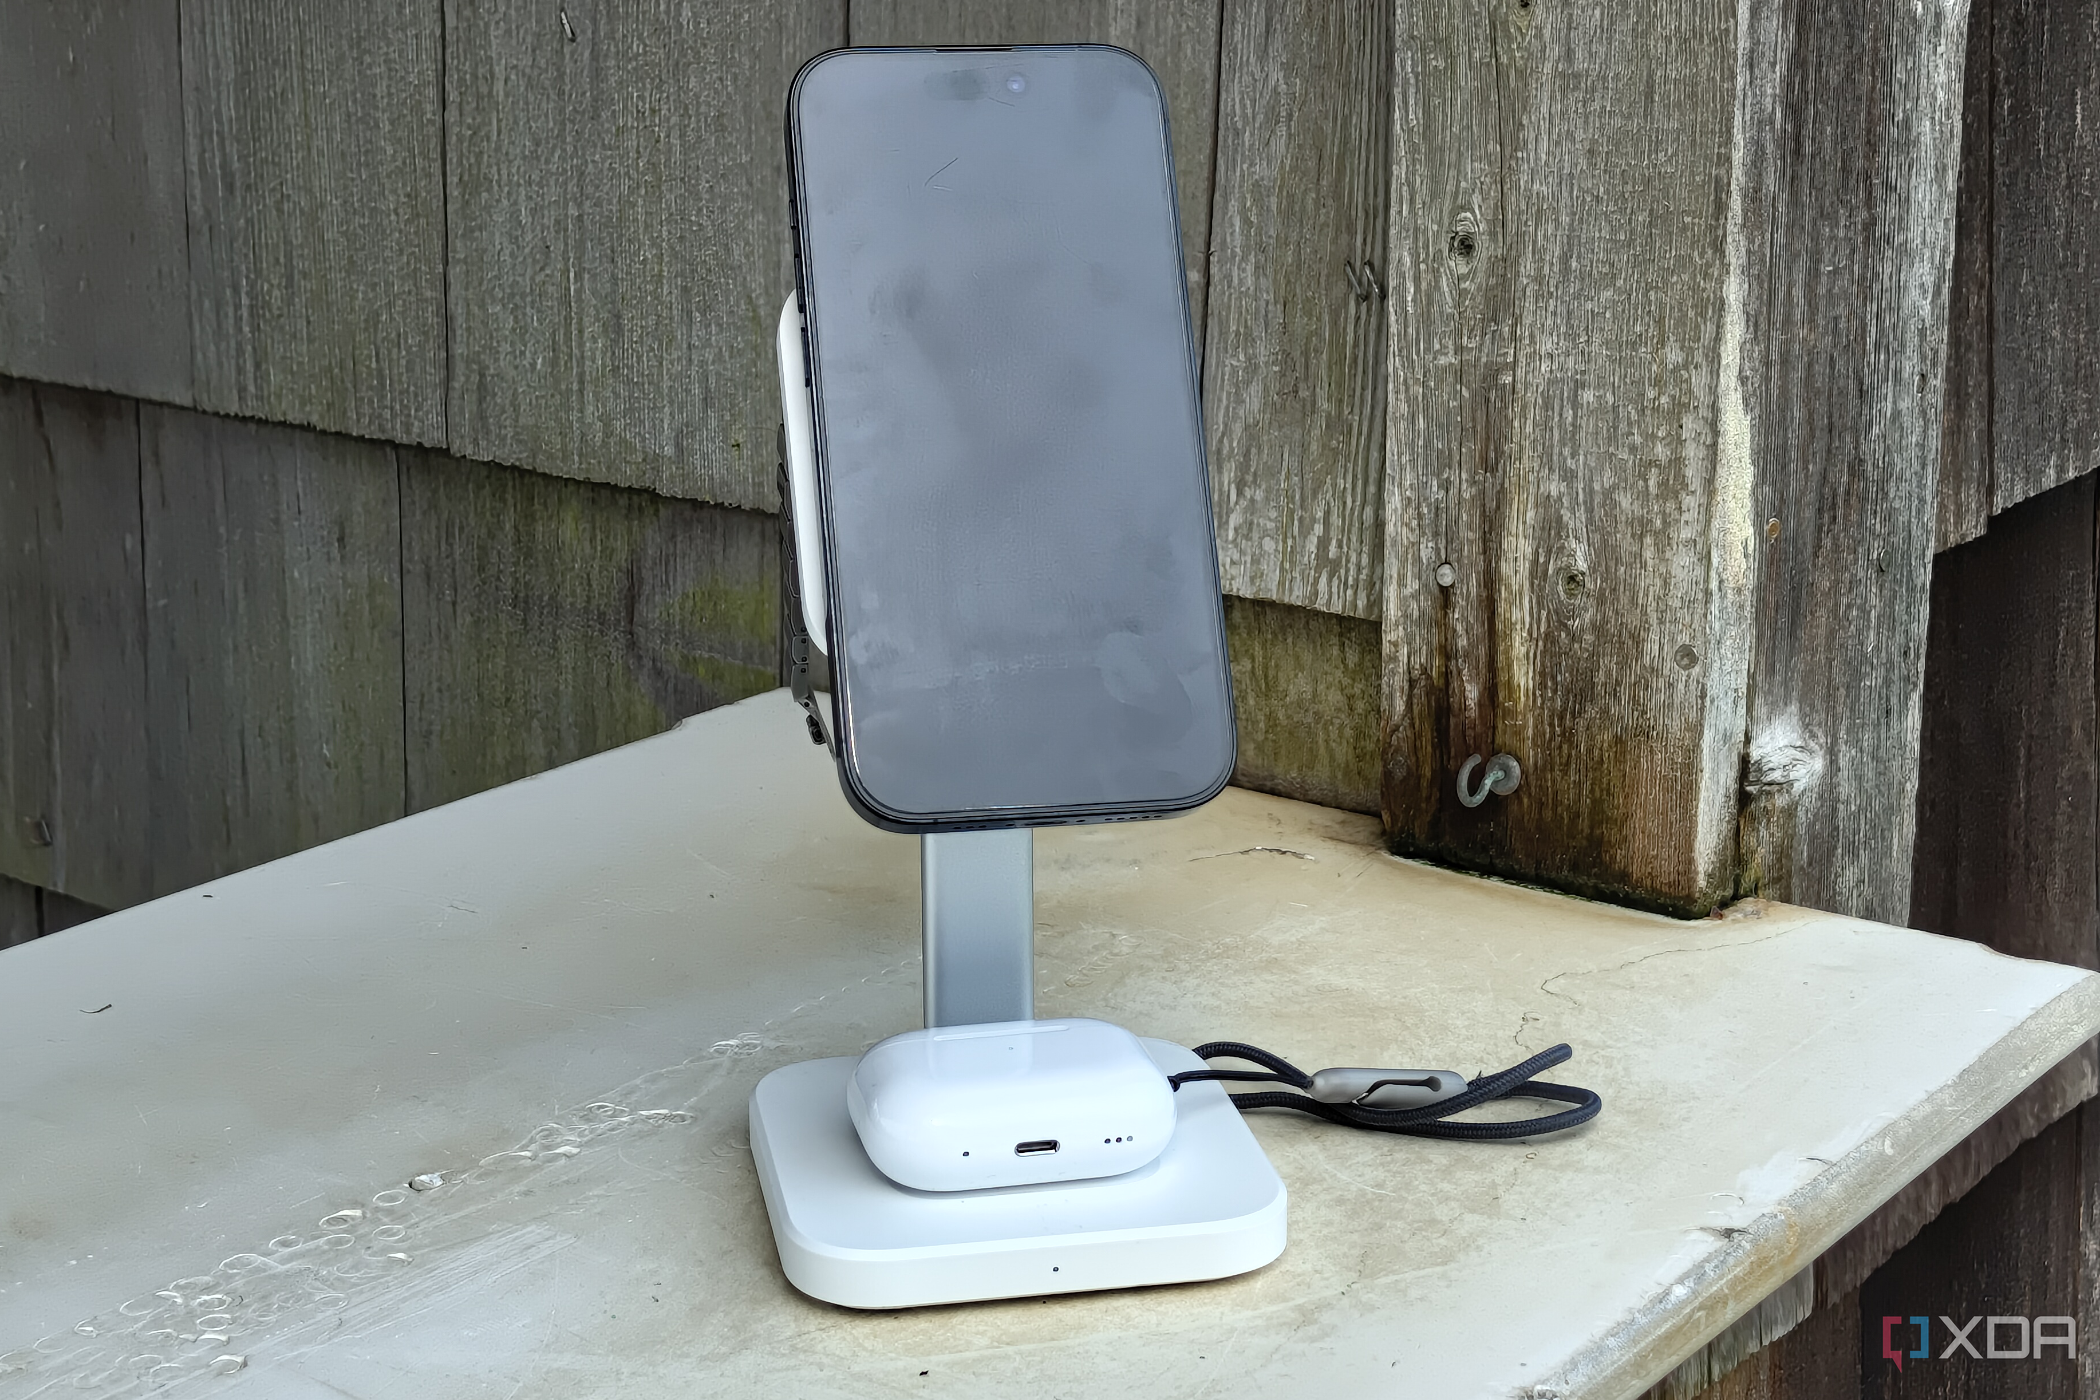 ESR 3-in-1 MagSafe Stand review: An unoriginal stand with one neat trick